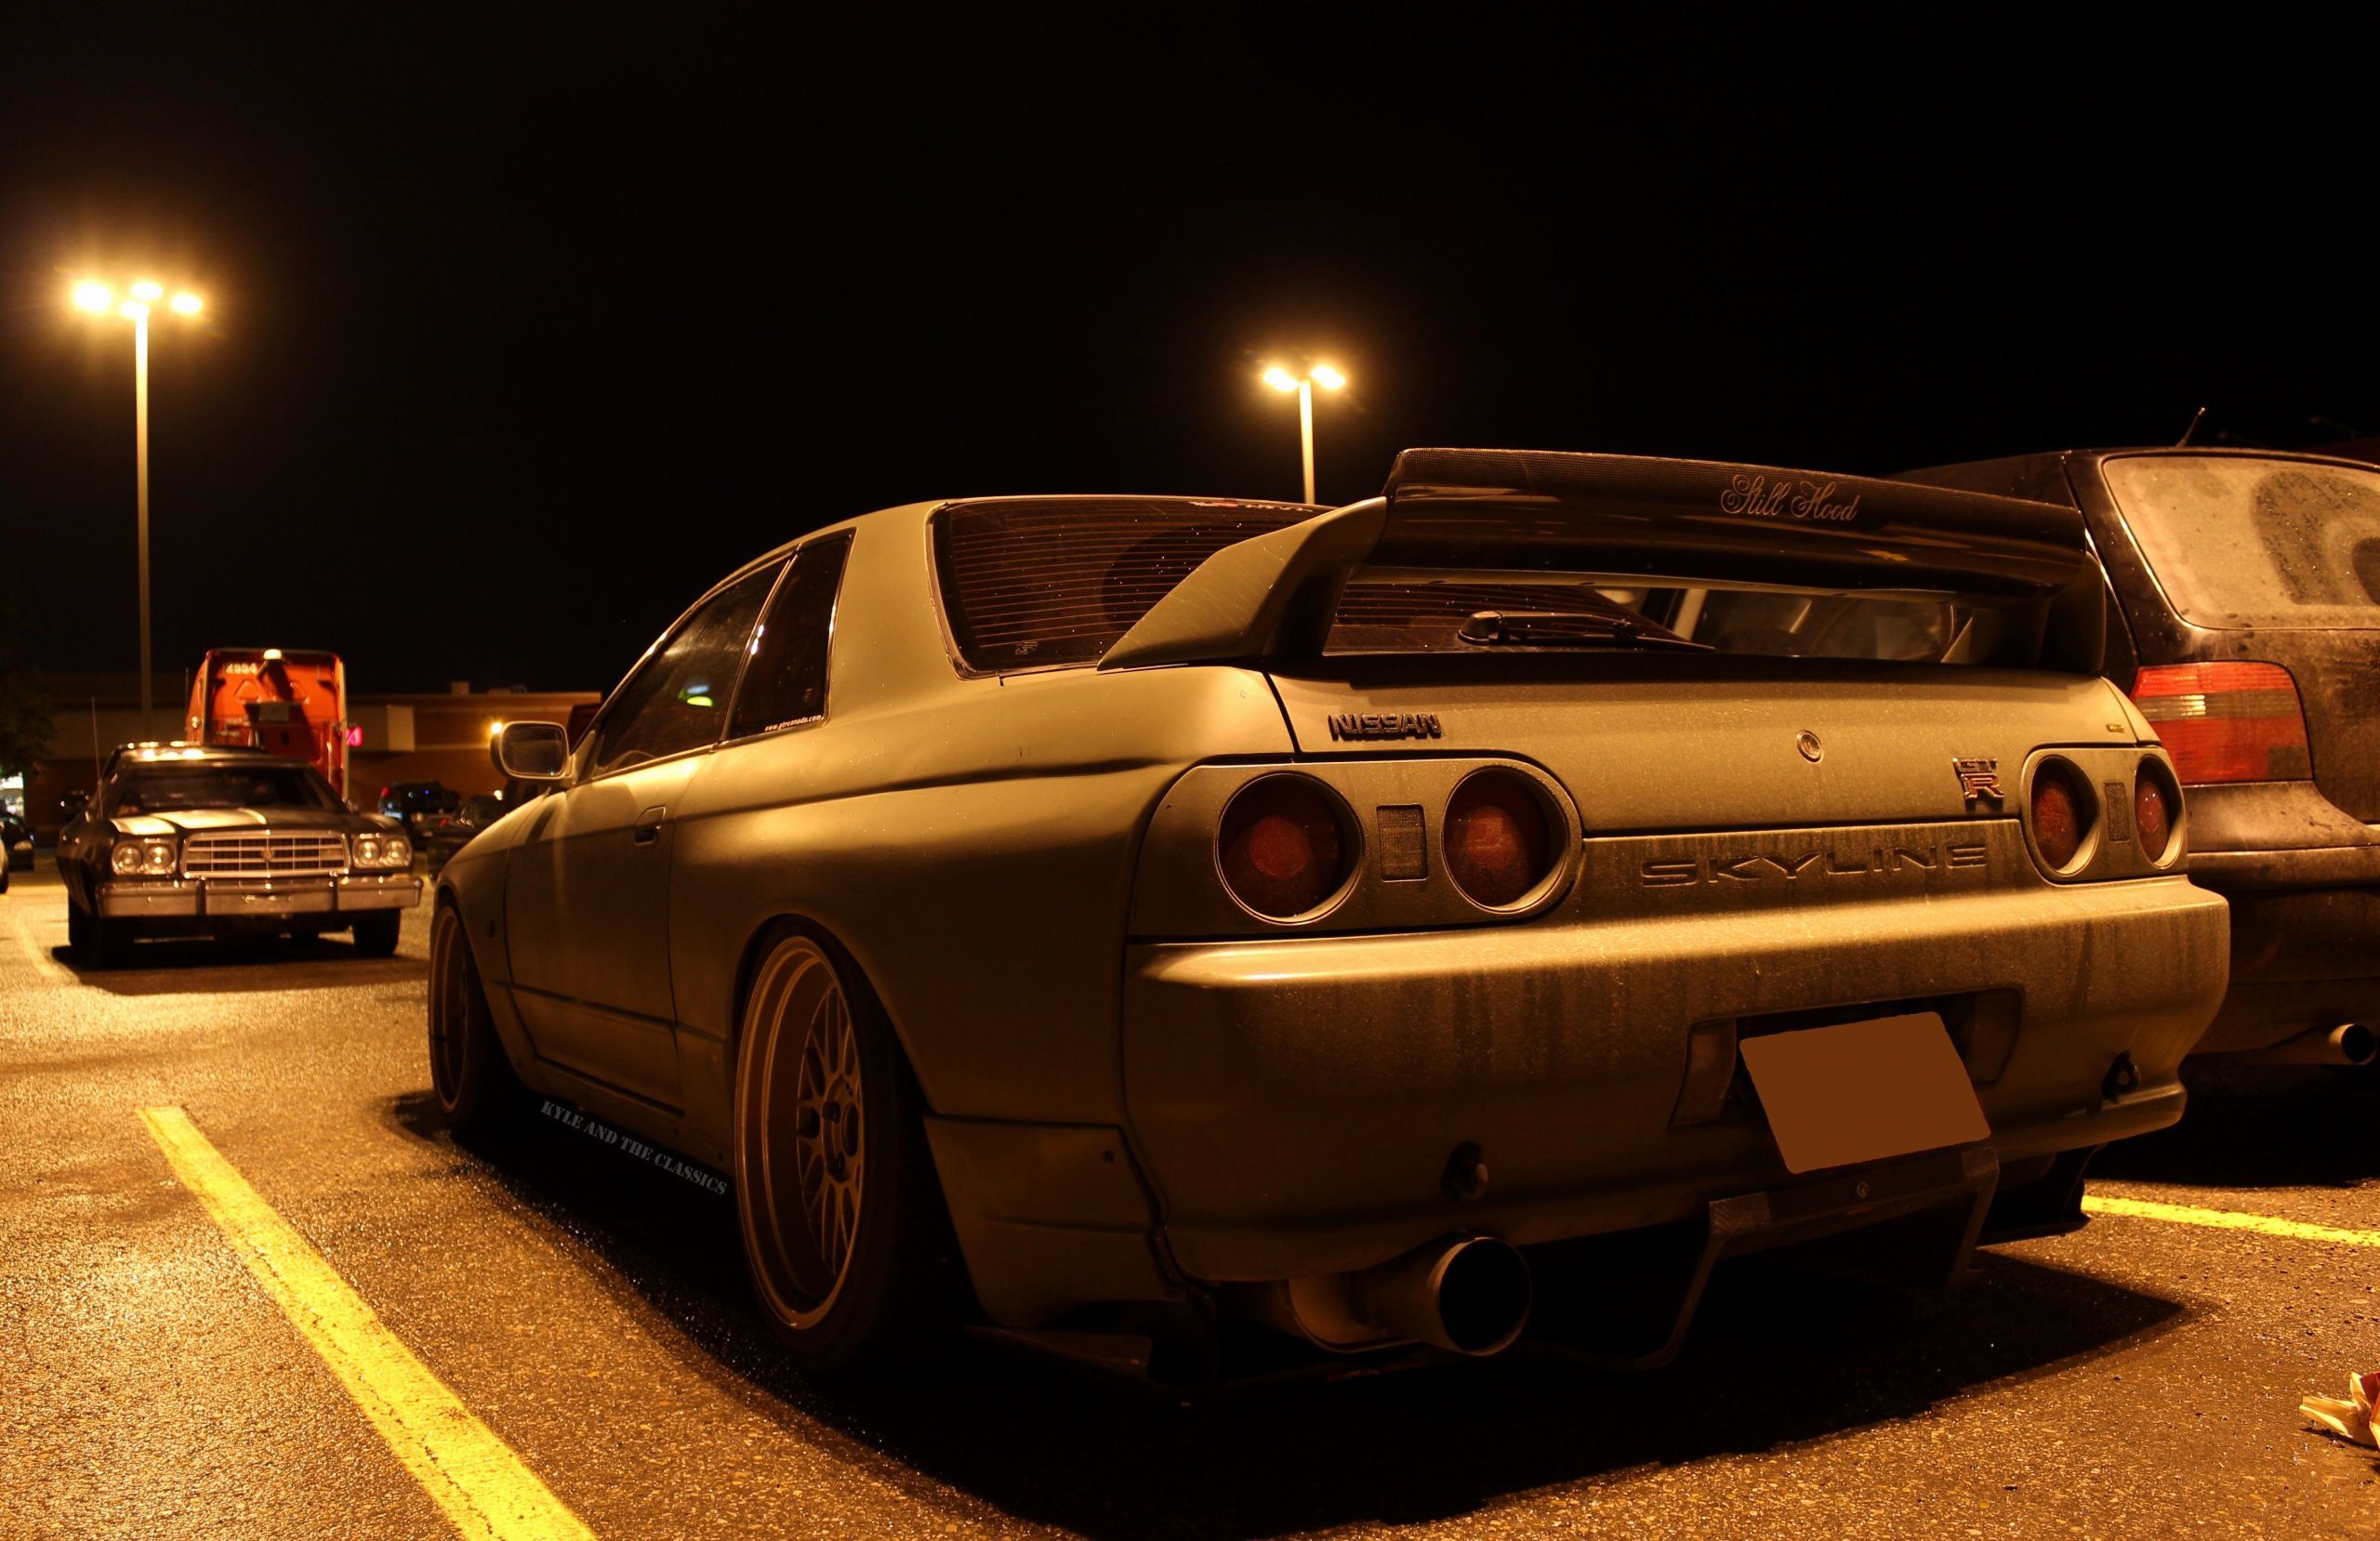 Inspirational R32 Skyline Wallpaper This Week of The Hudson